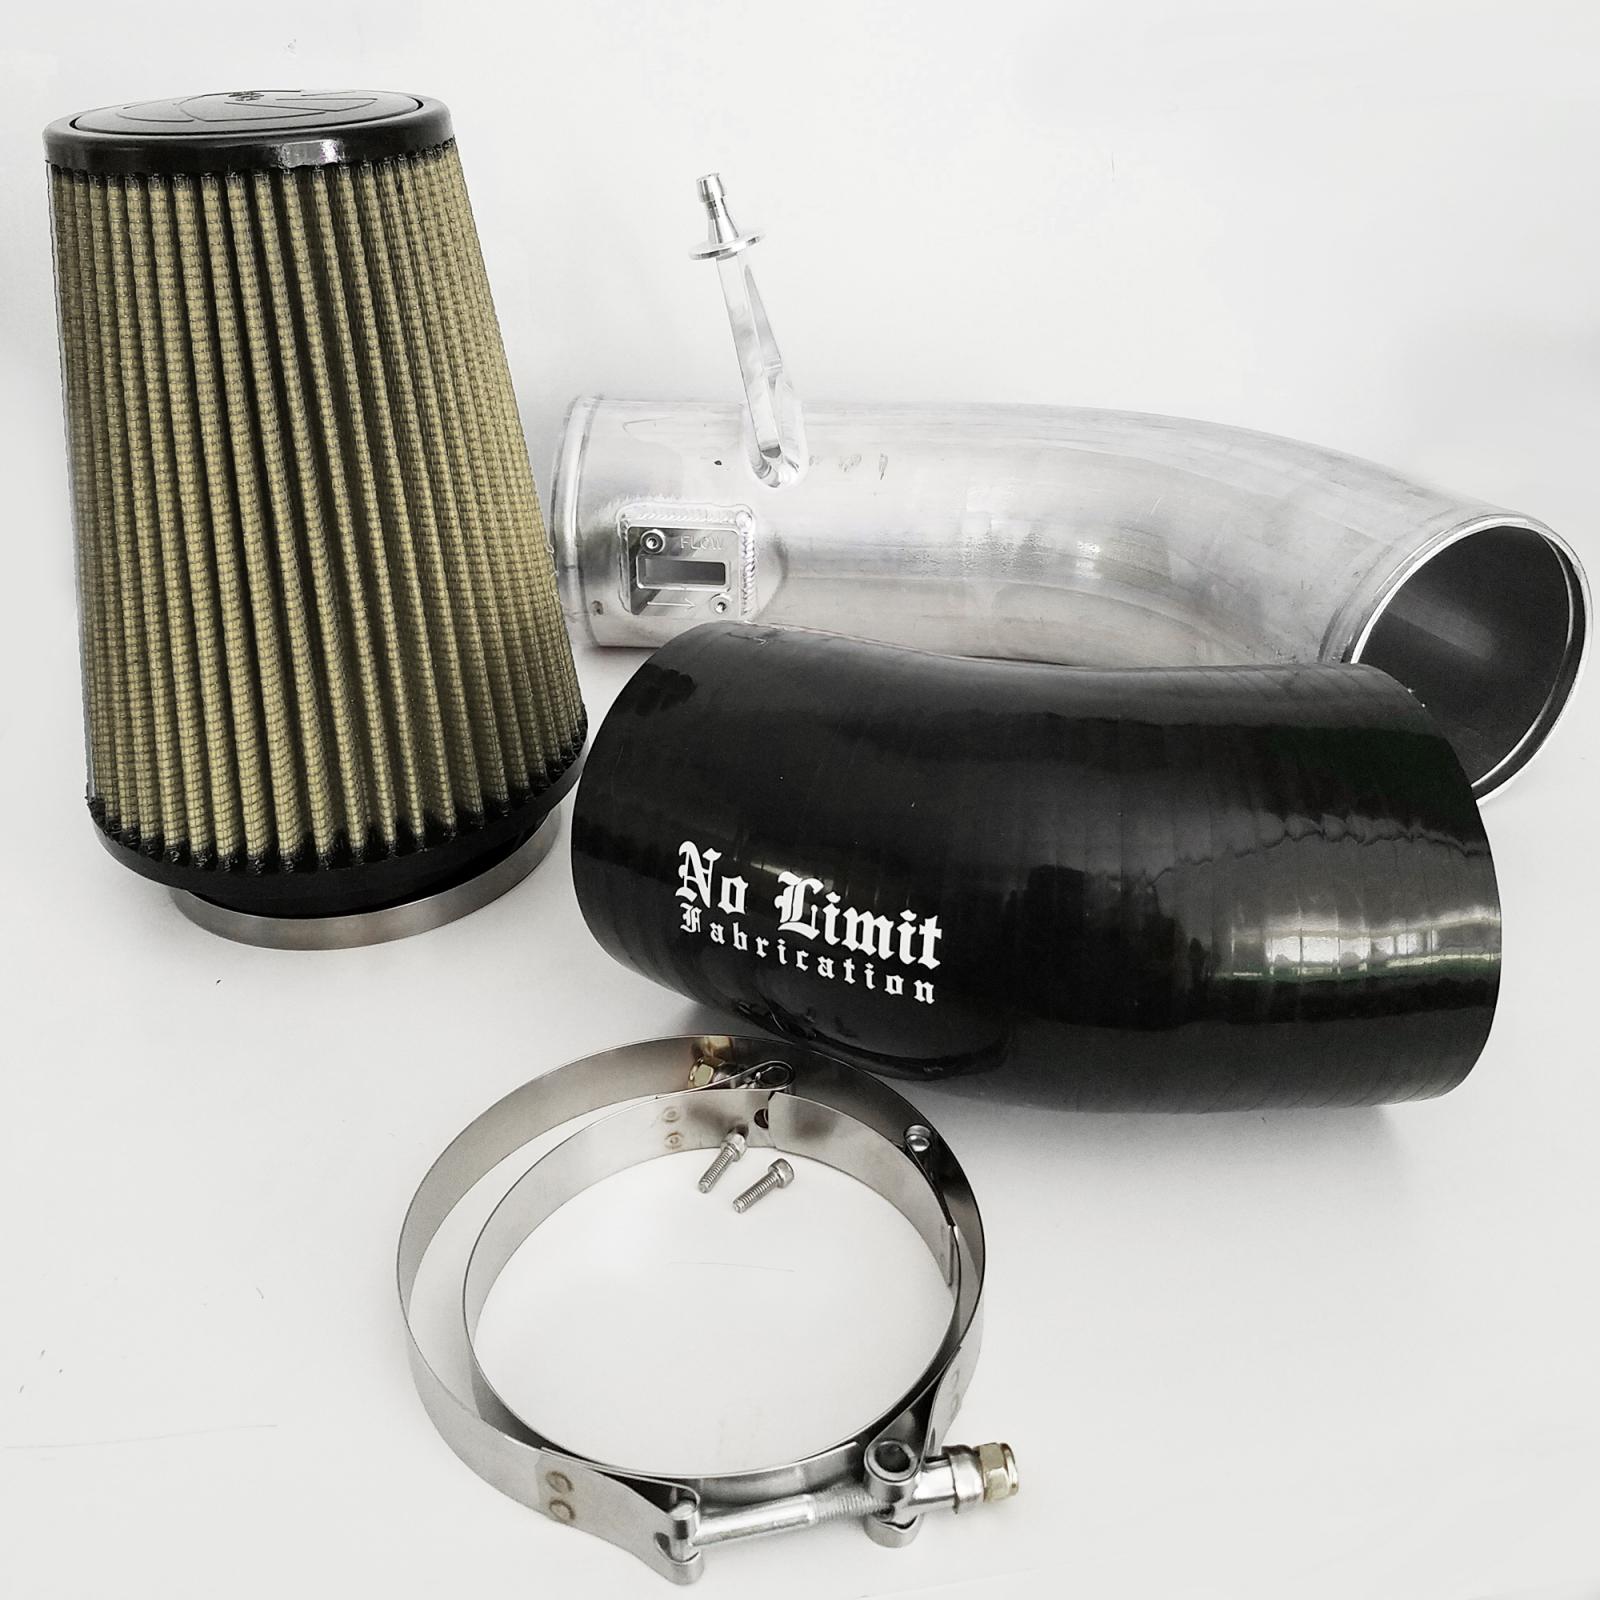 Cold Air Intake Raw PG7 Filter | 17-22 Ford F250 / F350 6.7L Powerstroke 50 States Legal